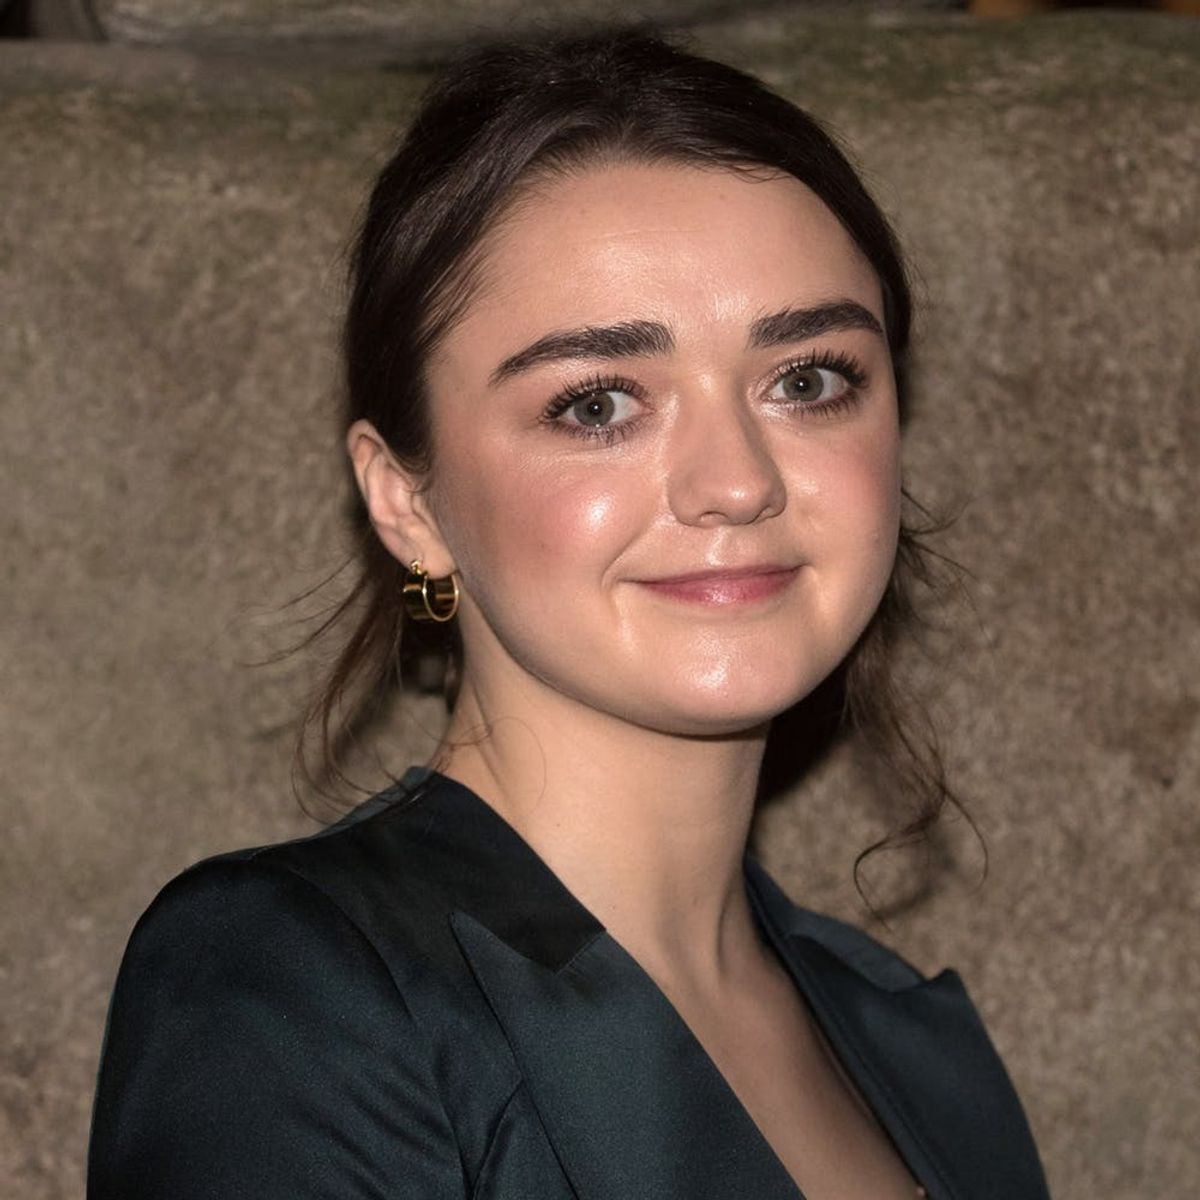 Why Maisie Williams Thinks She’ll Have Trouble Finding Roles After ‘Game of Thrones’